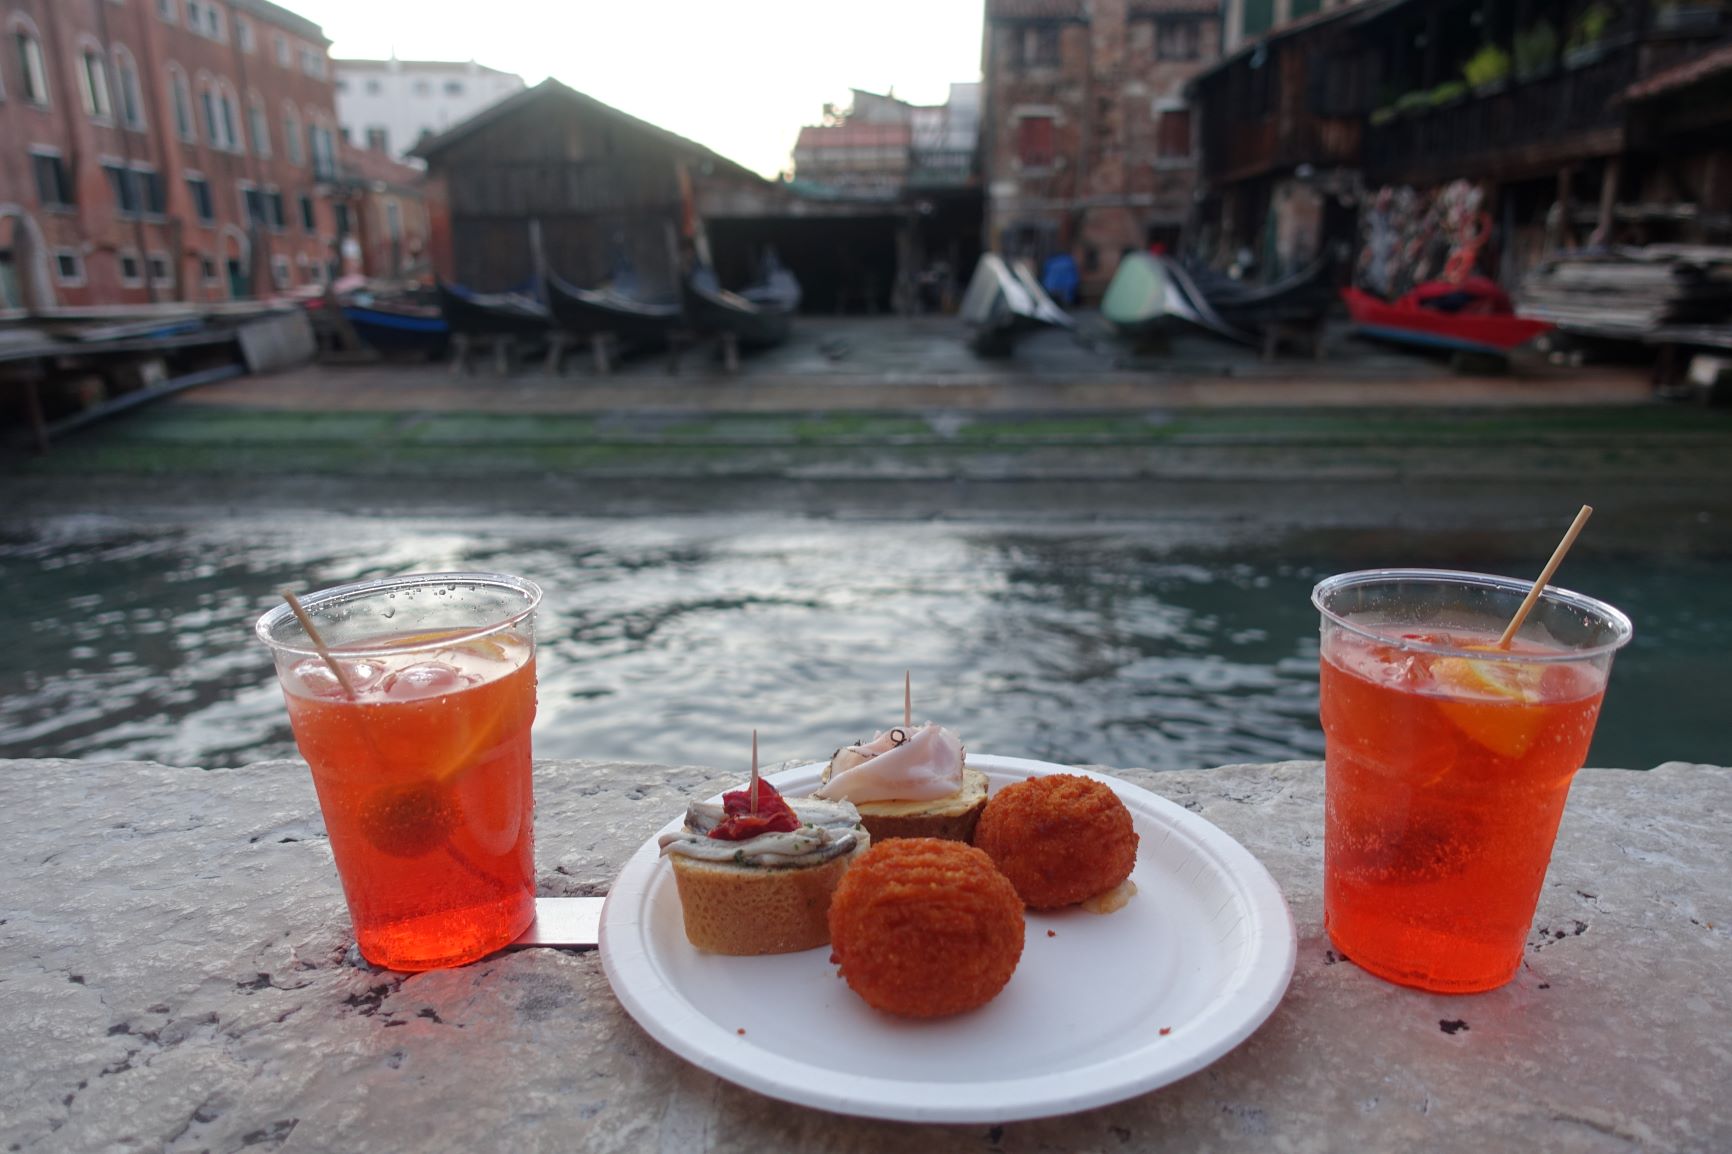 Where to eat in Venice, Italy